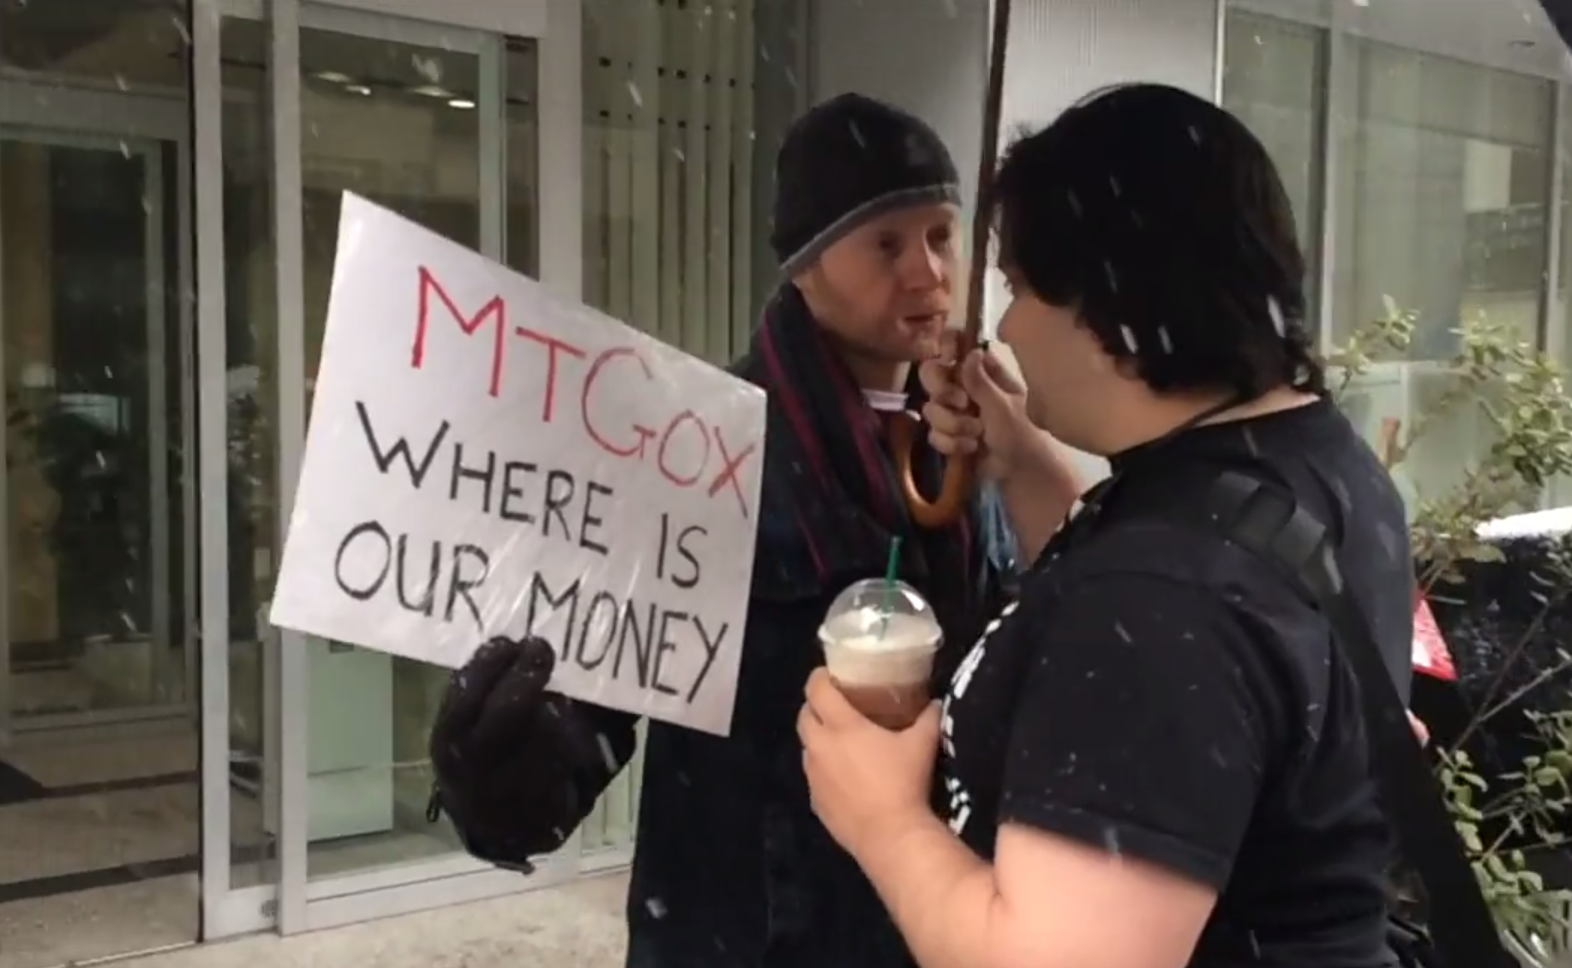 Former Mt. Gox CEO Mark Karpeles To Appeal Conviction